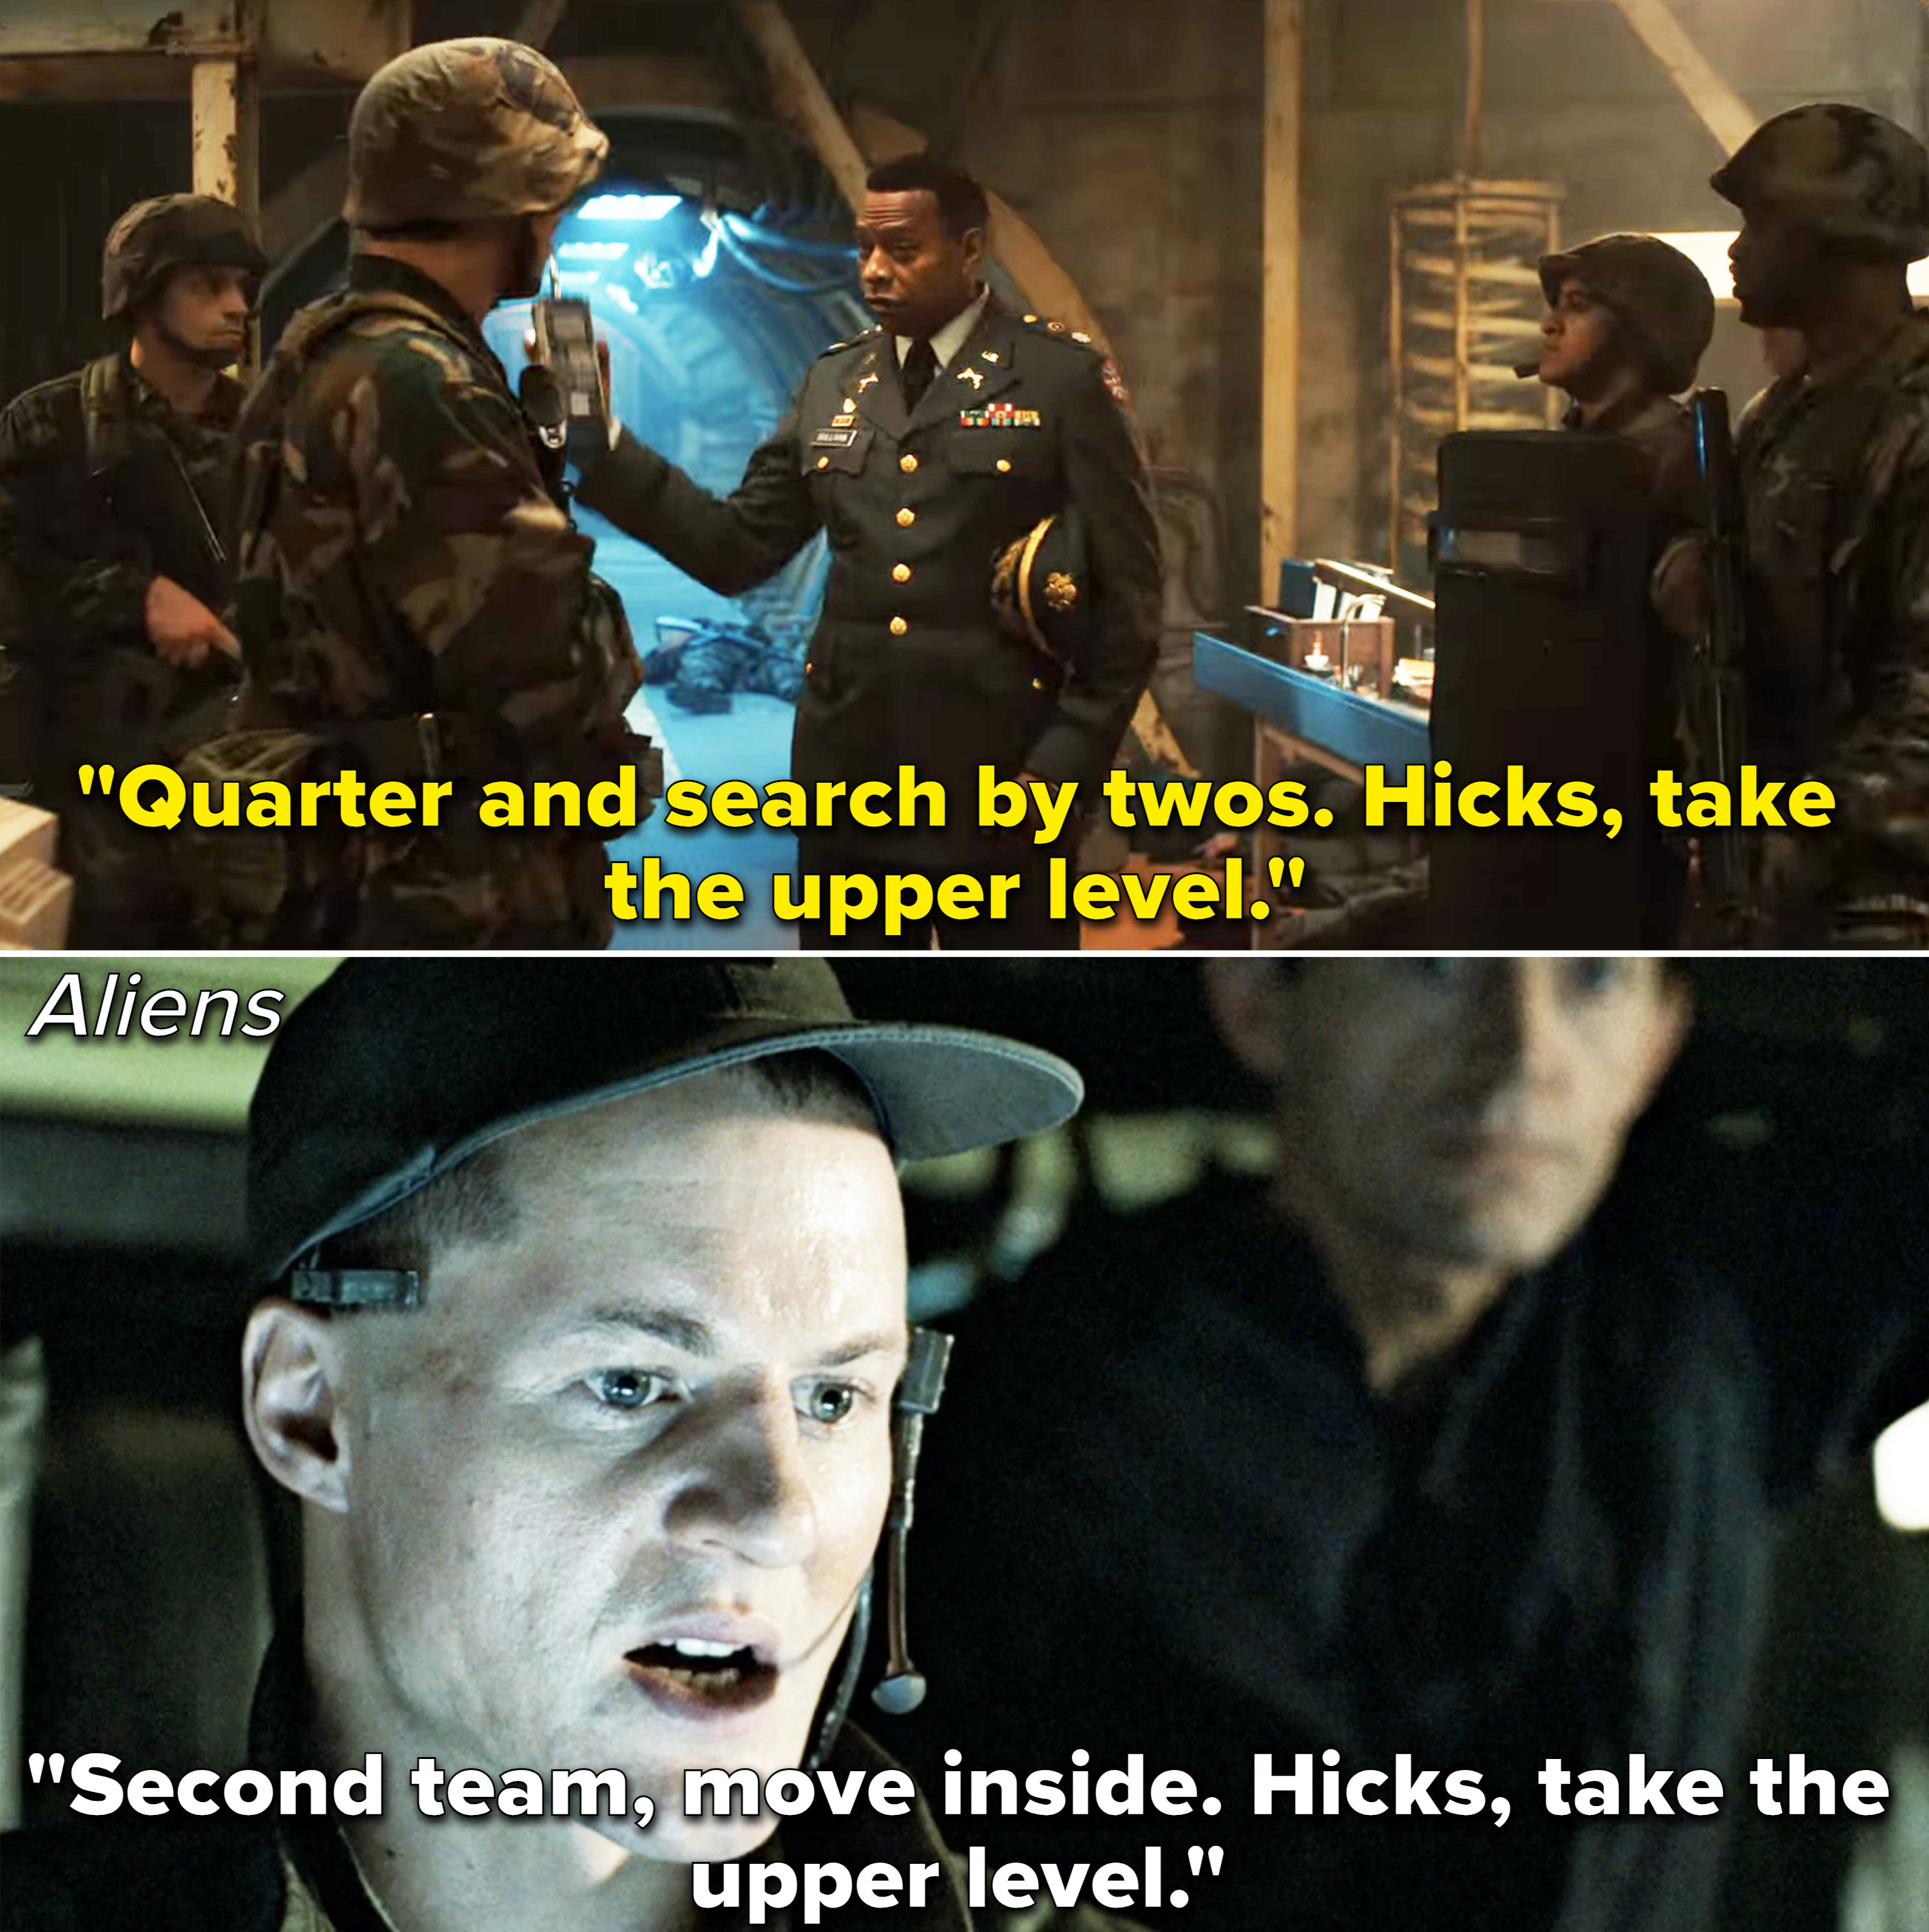 both scenes where the actors are saying &quot;hicks, take the upper level&quot;